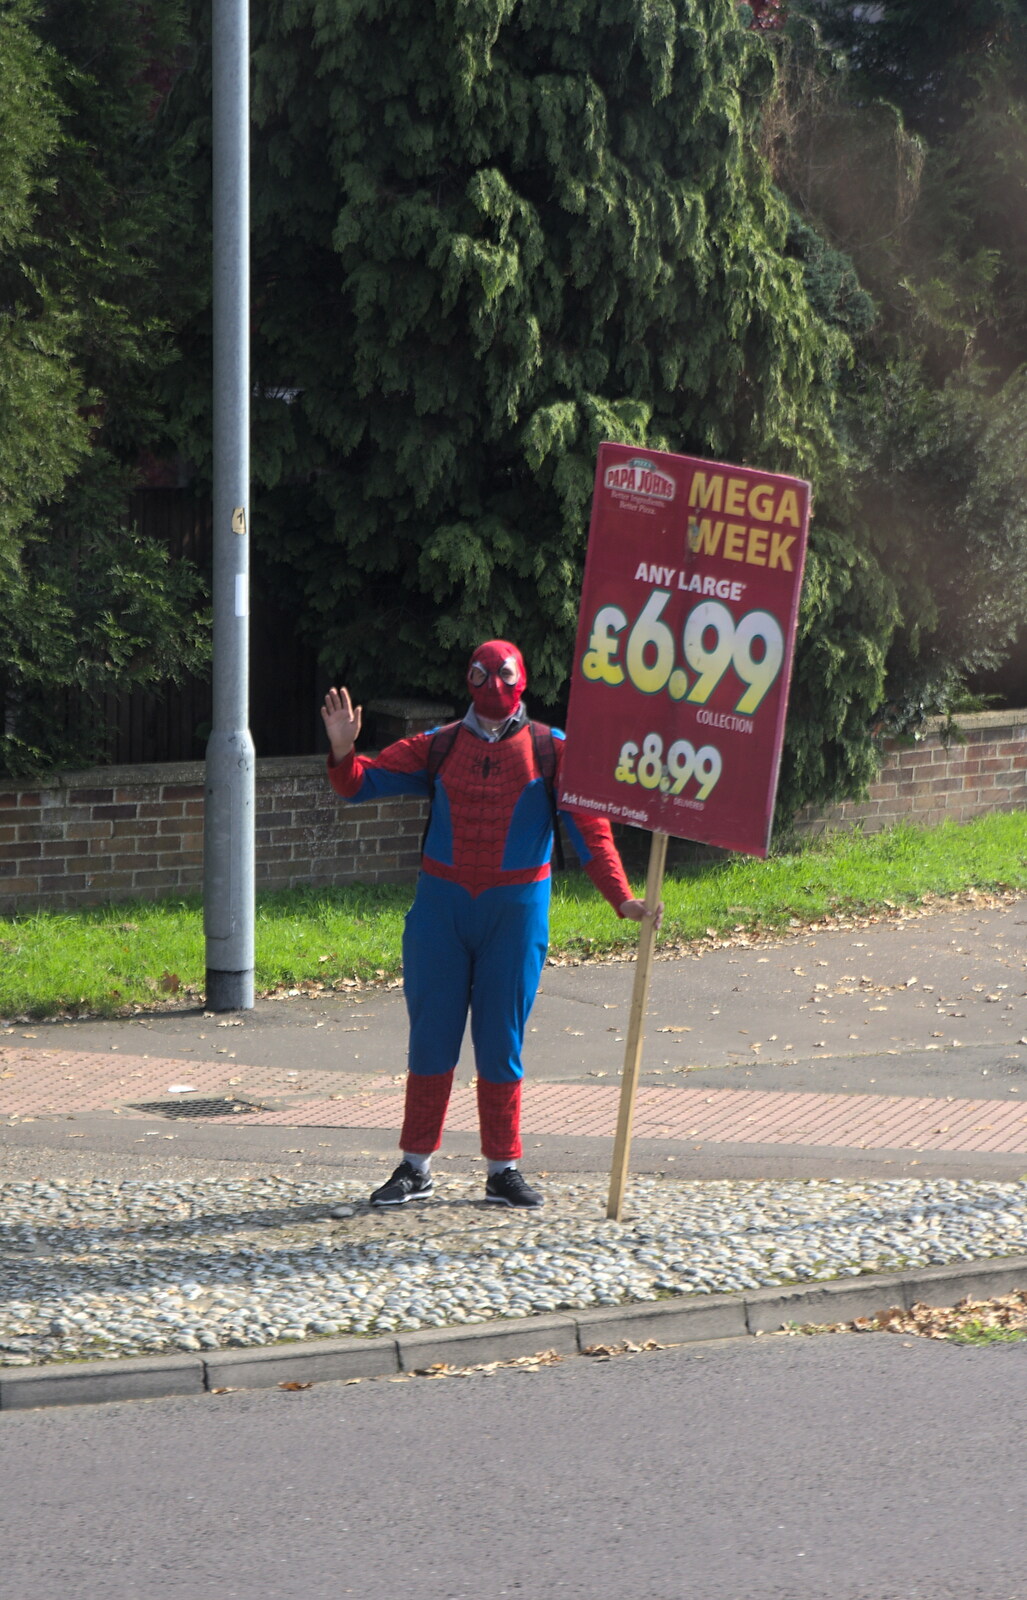 A very dodgy-looking Spider-Man advertises pizza from Fred's Lego, a Giant Clock, and a Trip to Norwich, Norfolk - 25th September 2015